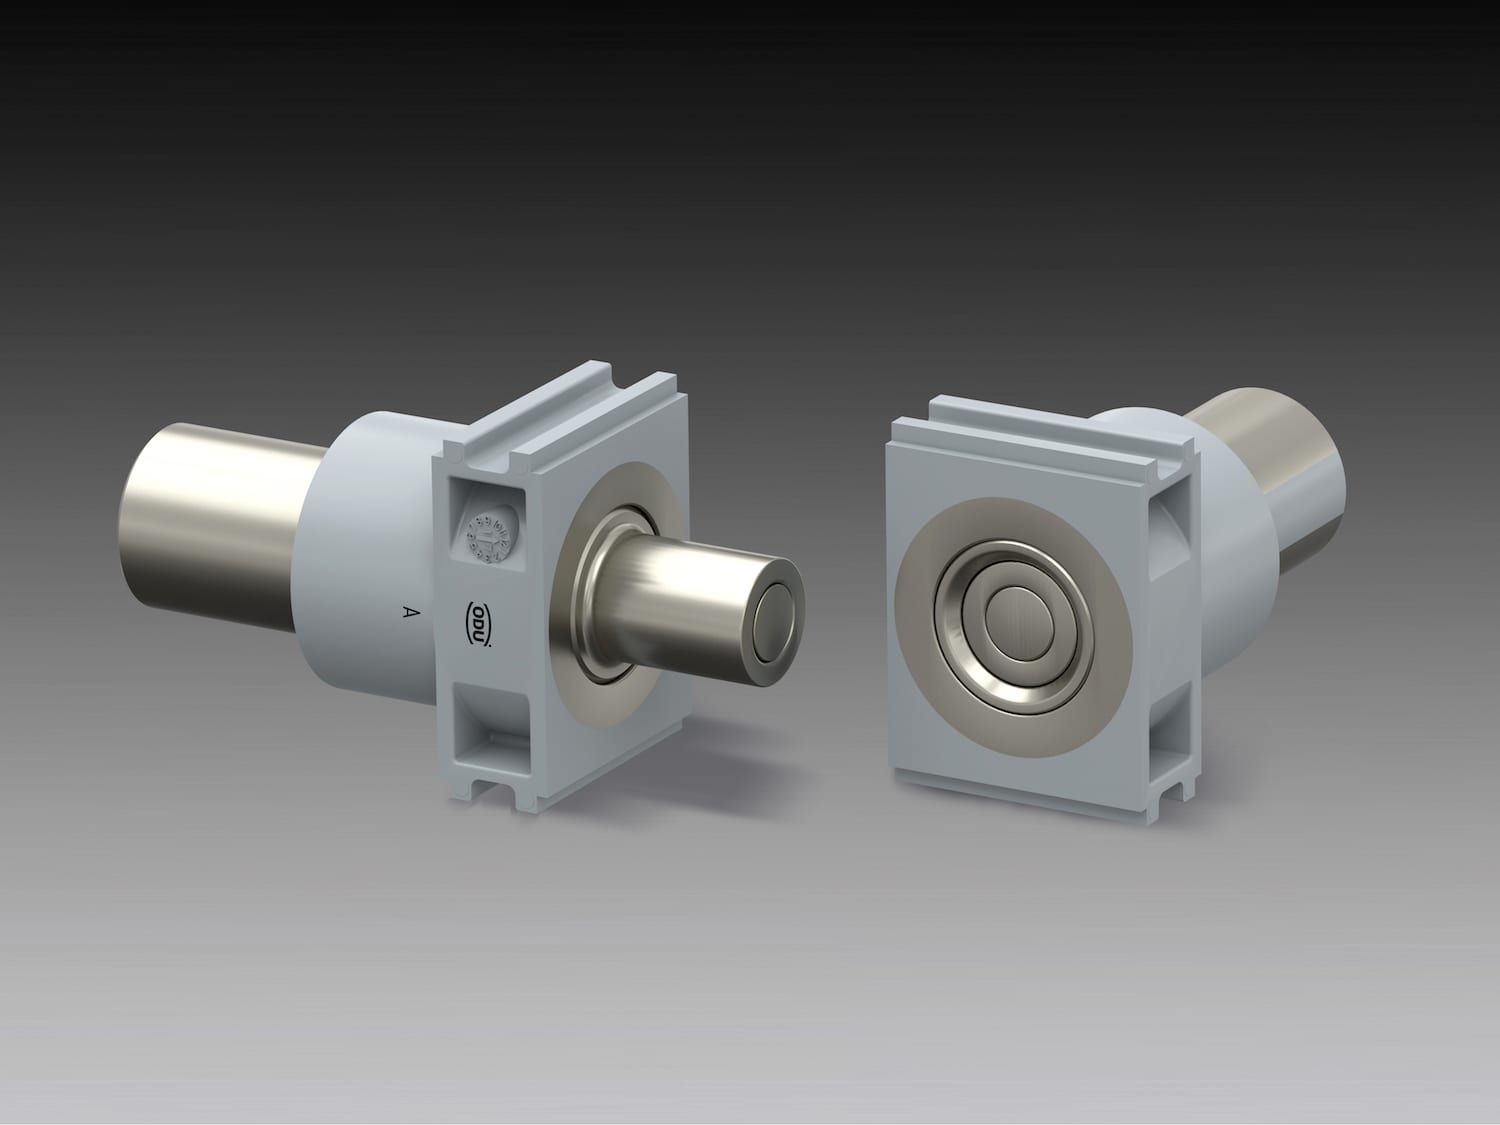 ODU expanded its modular, high-reliability ODU-MAC® Silver-Line automatic docking connectors